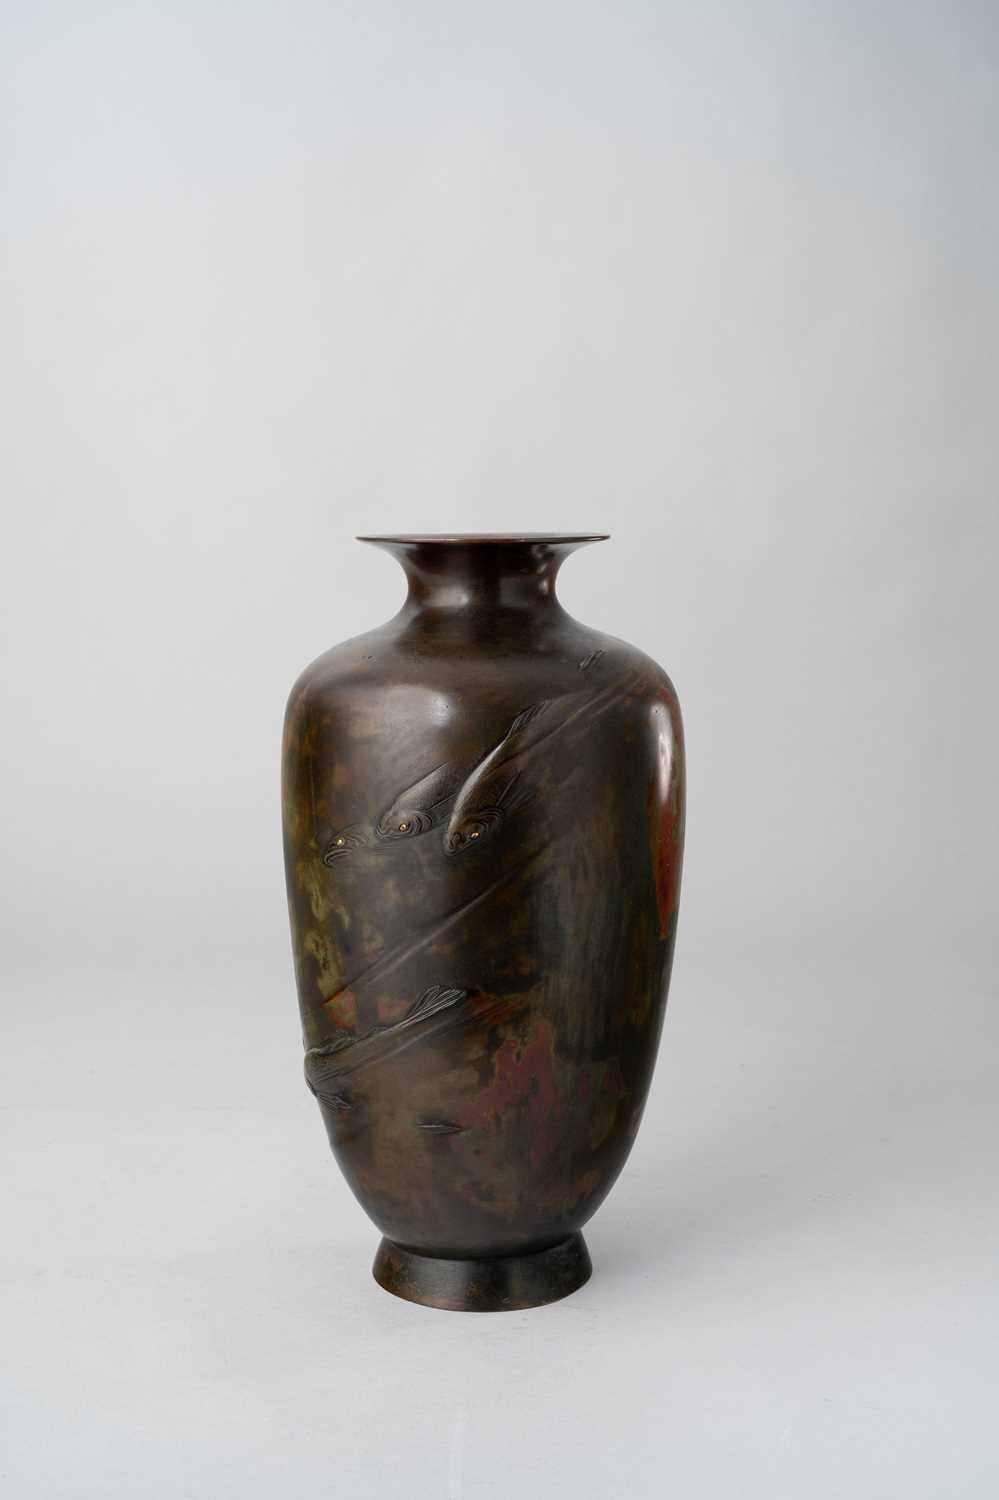 A TALL JAPANESE BRONZE VASE MEIJI ERA, 19TH/20TH CENTURY The cylindrical body raised on a short foot